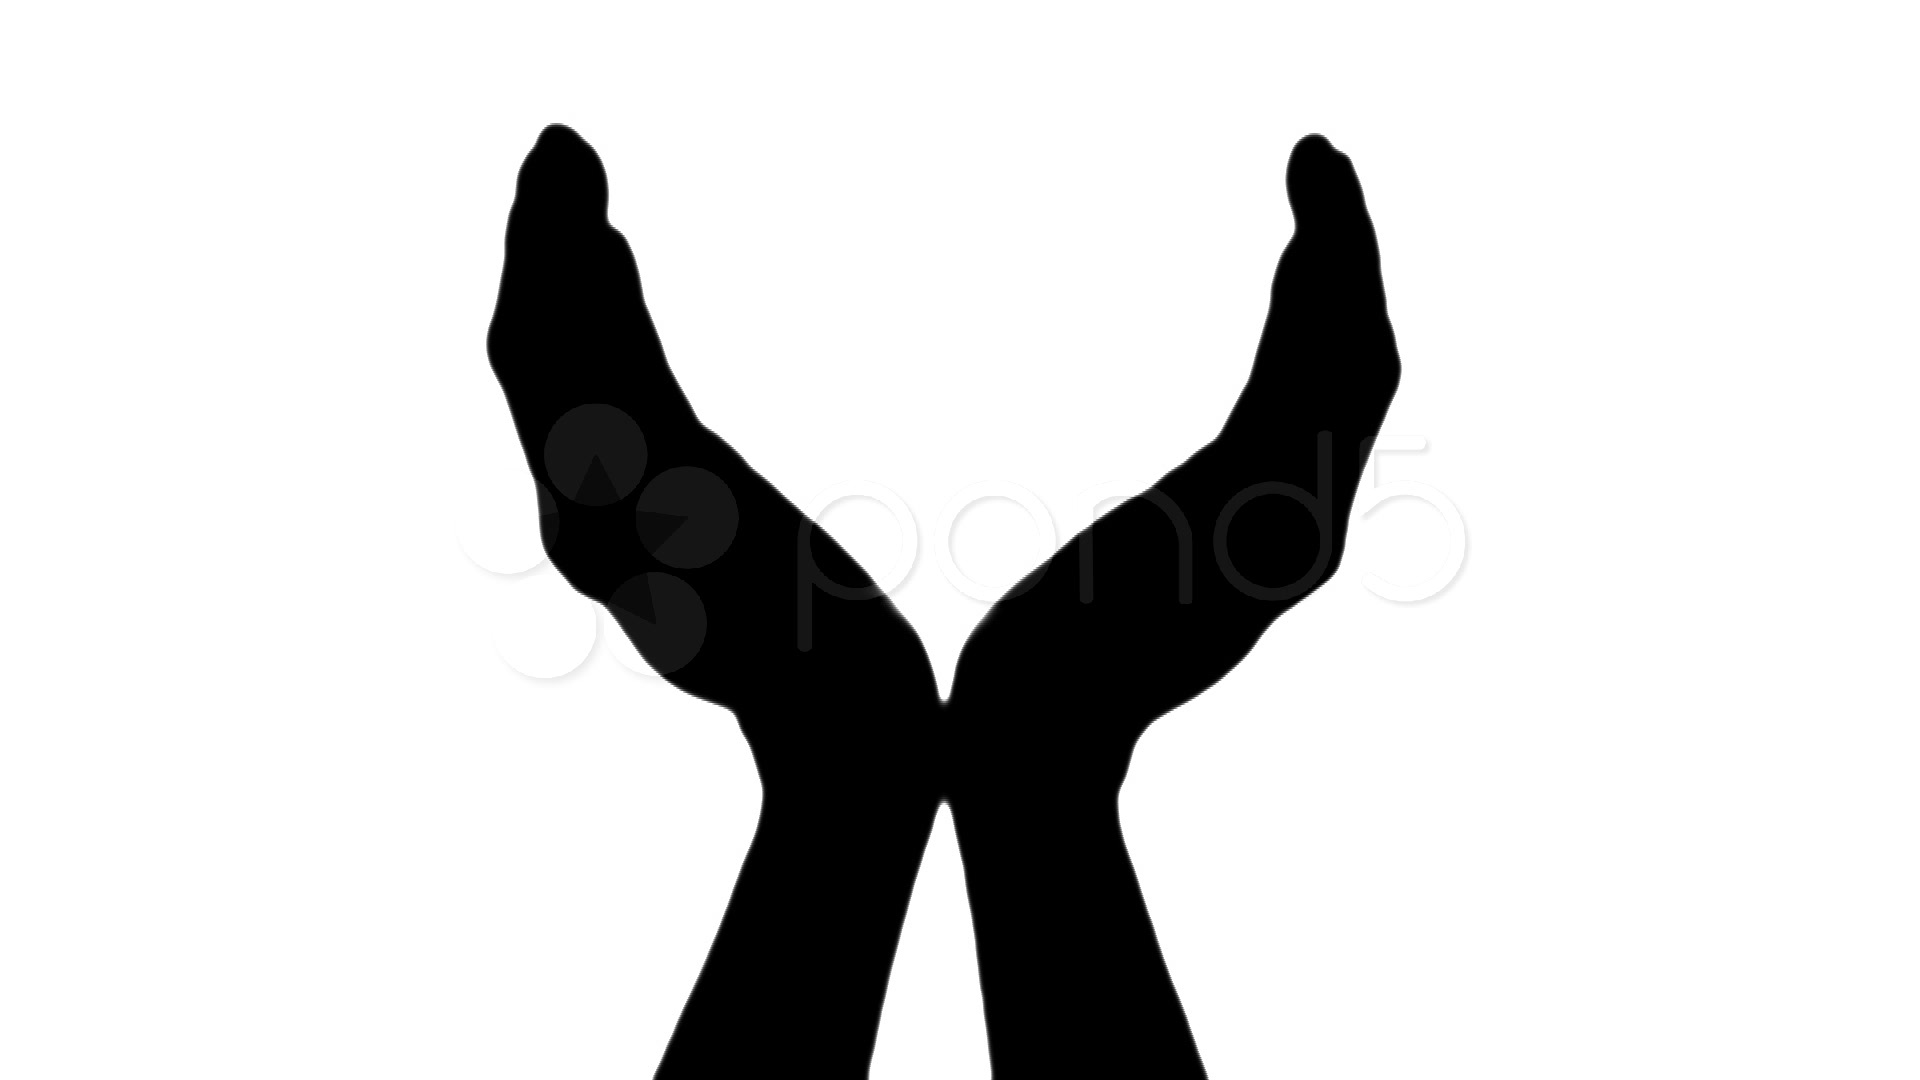 Free Silhouette Of Hands, Download Free Clip Art, Free Clip